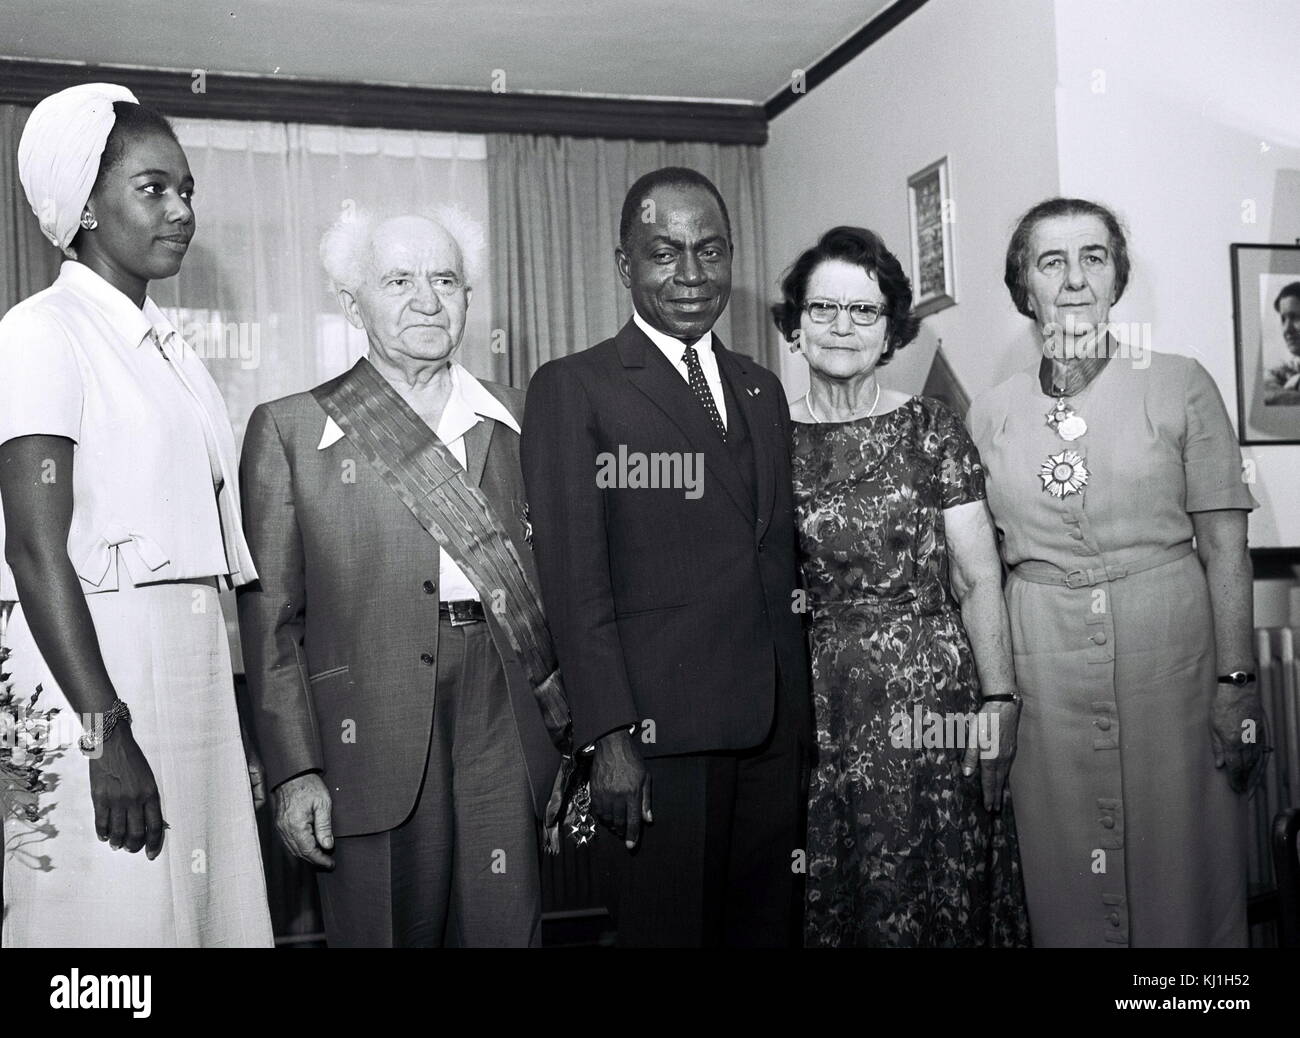 Israeli Prime Minister, Ben-Gurion with Ivory Coast President Houphouet Boigny and Foreign Minister Golda Meir in Jerusalem 1962 Stock Photo